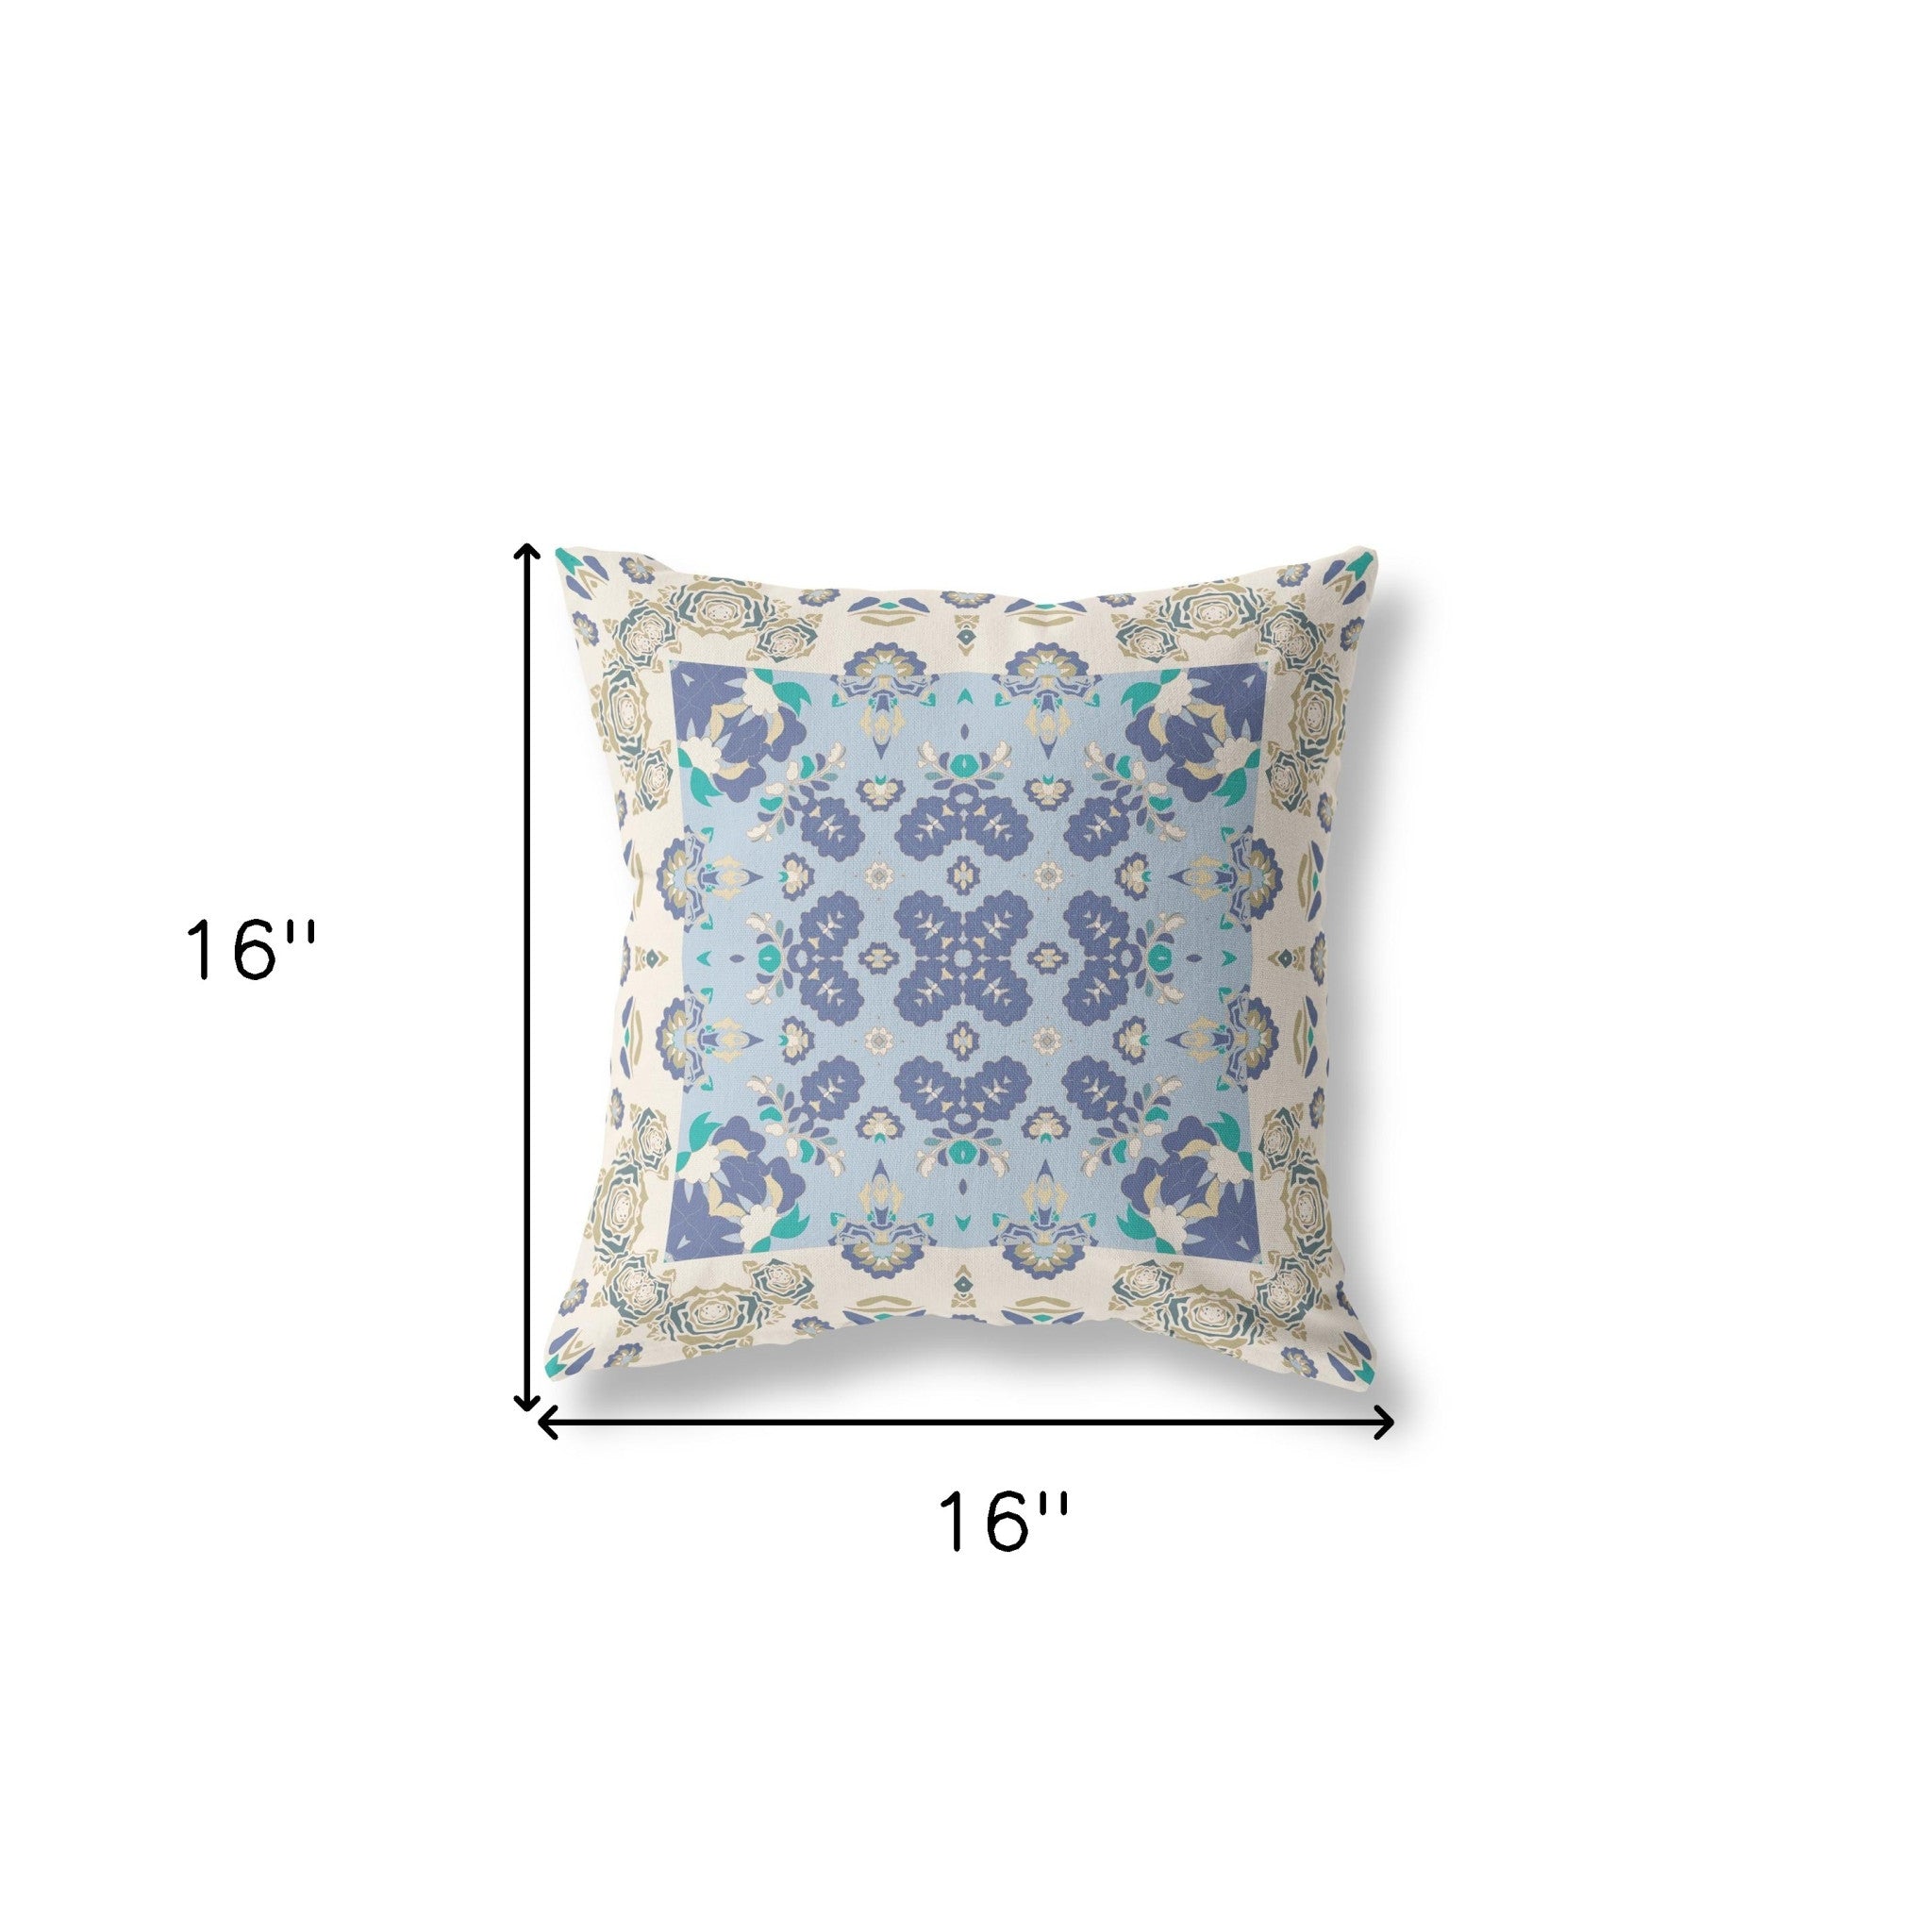 16” White Blue Rose Box Indoor Outdoor Zippered Throw Pillow